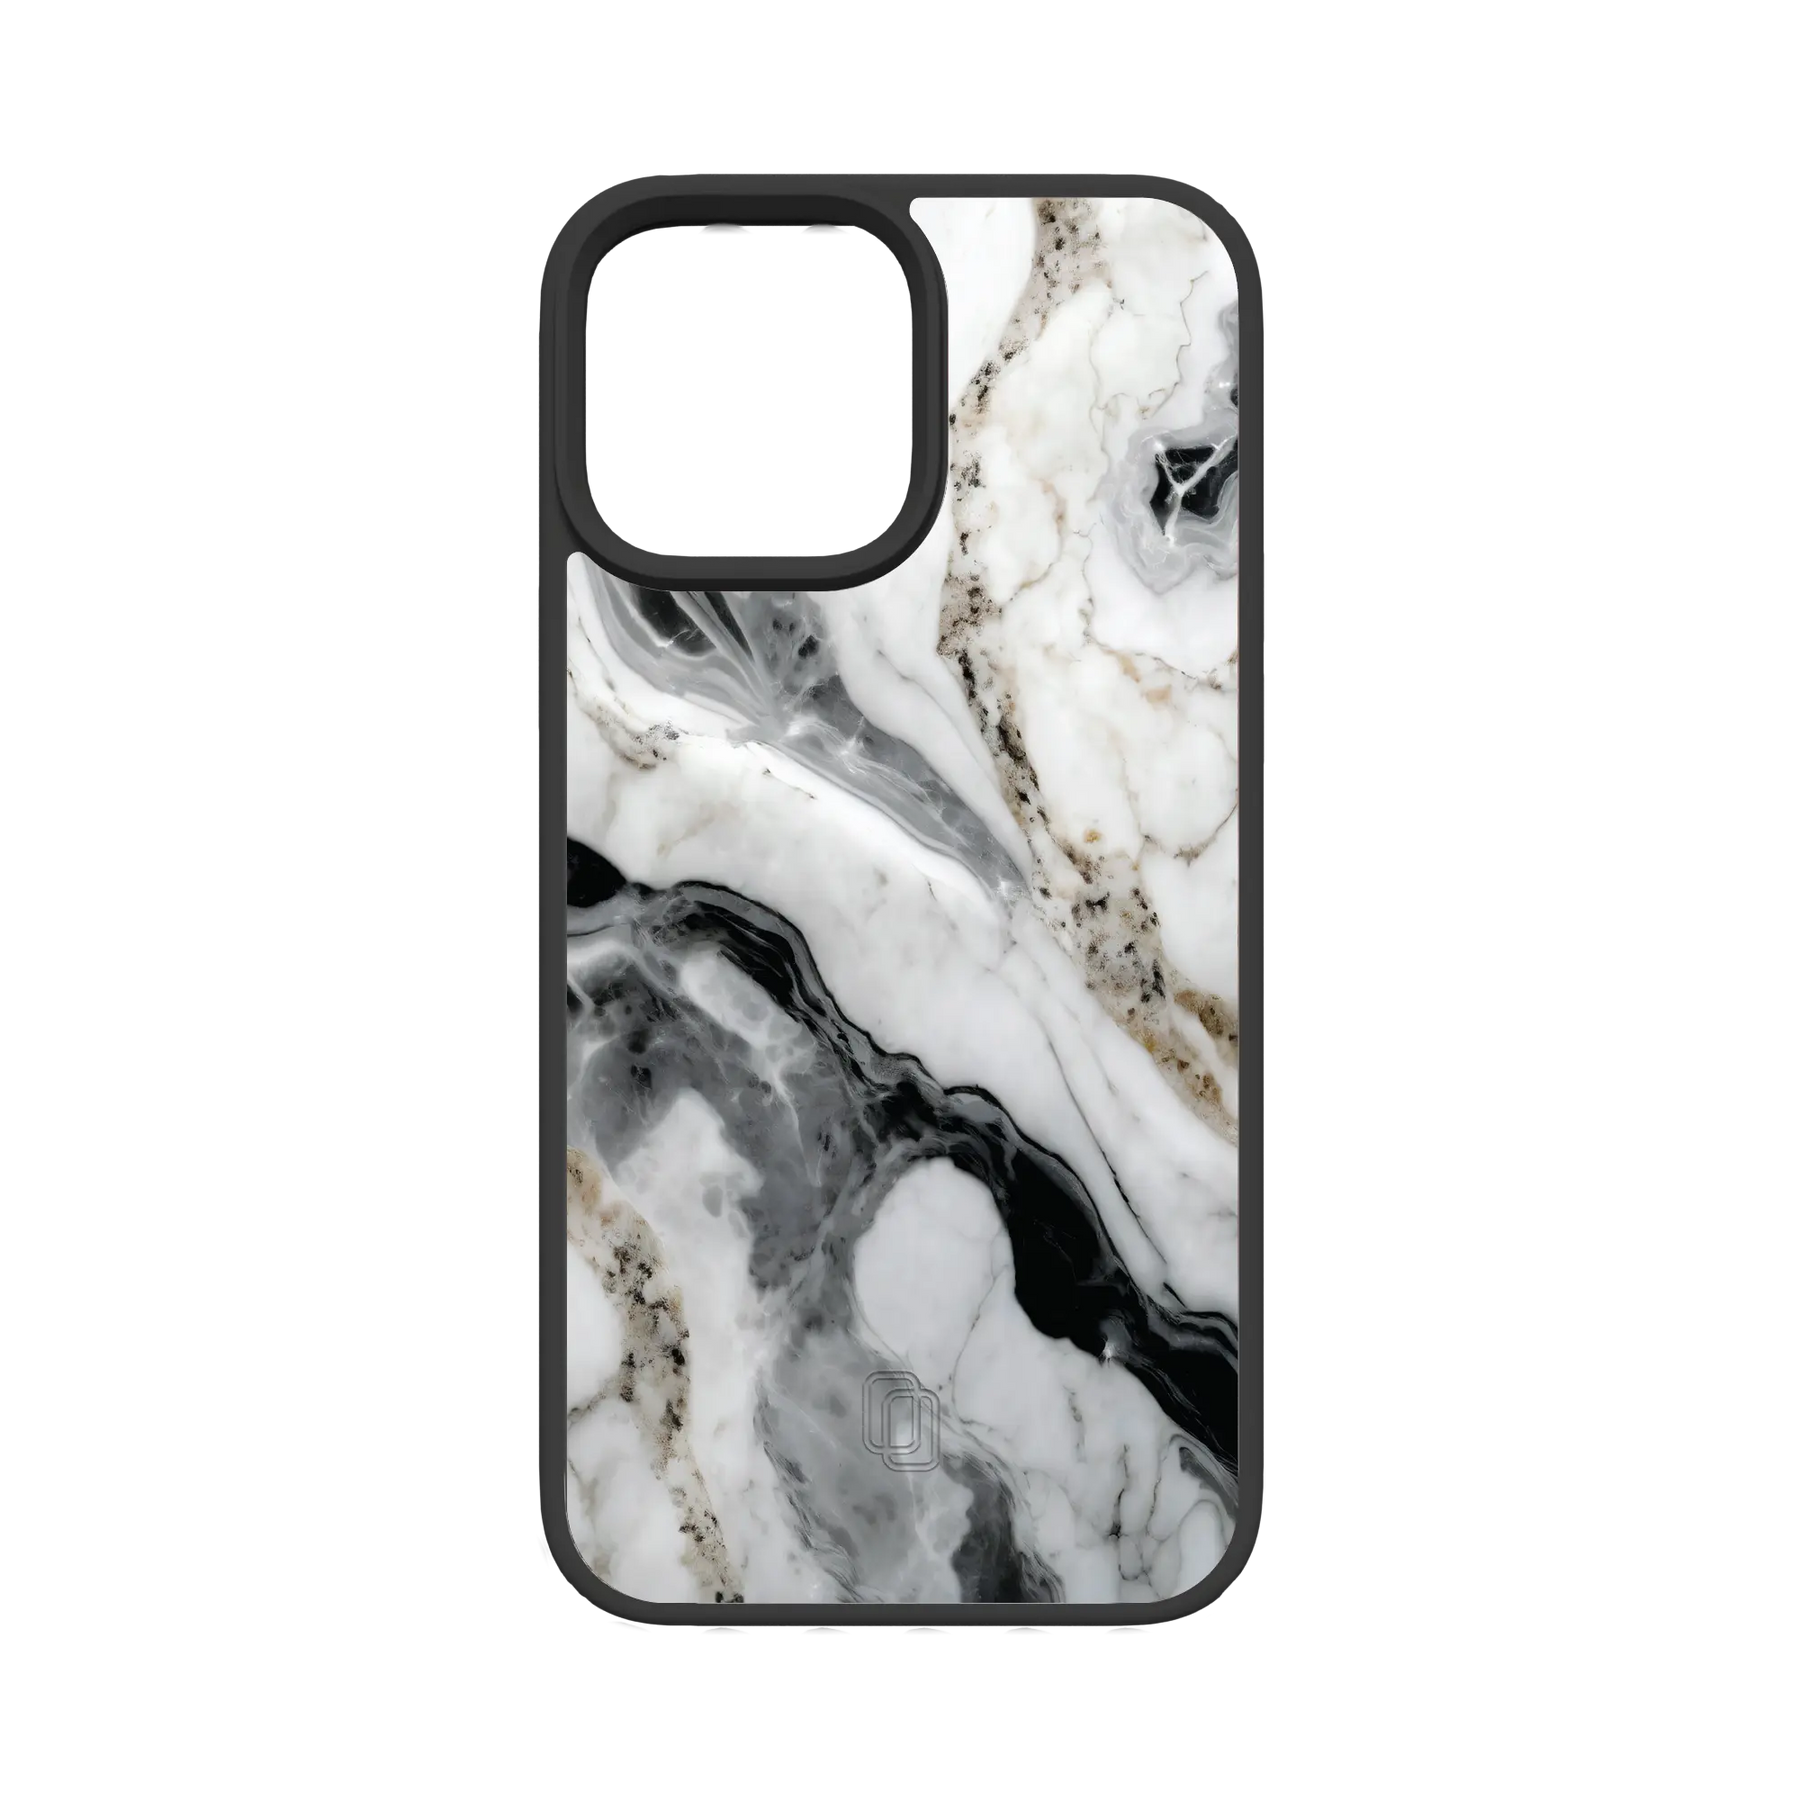 Apple-iPhone-12-Pro-Max-Crystal-Clear Pure Snow | Protective MagSafe Case | Marble Stone Collection for Apple iPhone 12 Series cellhelmet cellhelmet